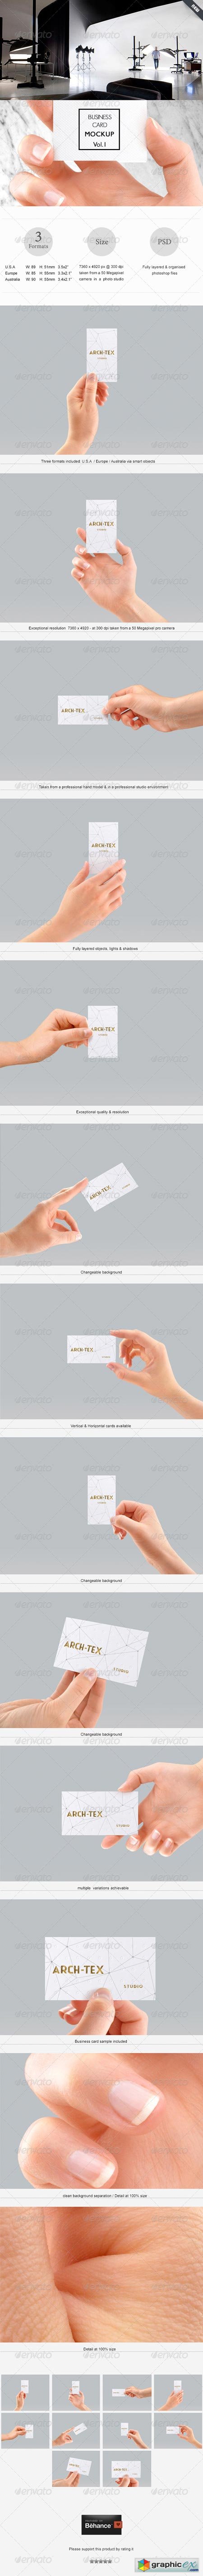 Business Card Mock-up Vol.1 - Hand edition 7839761